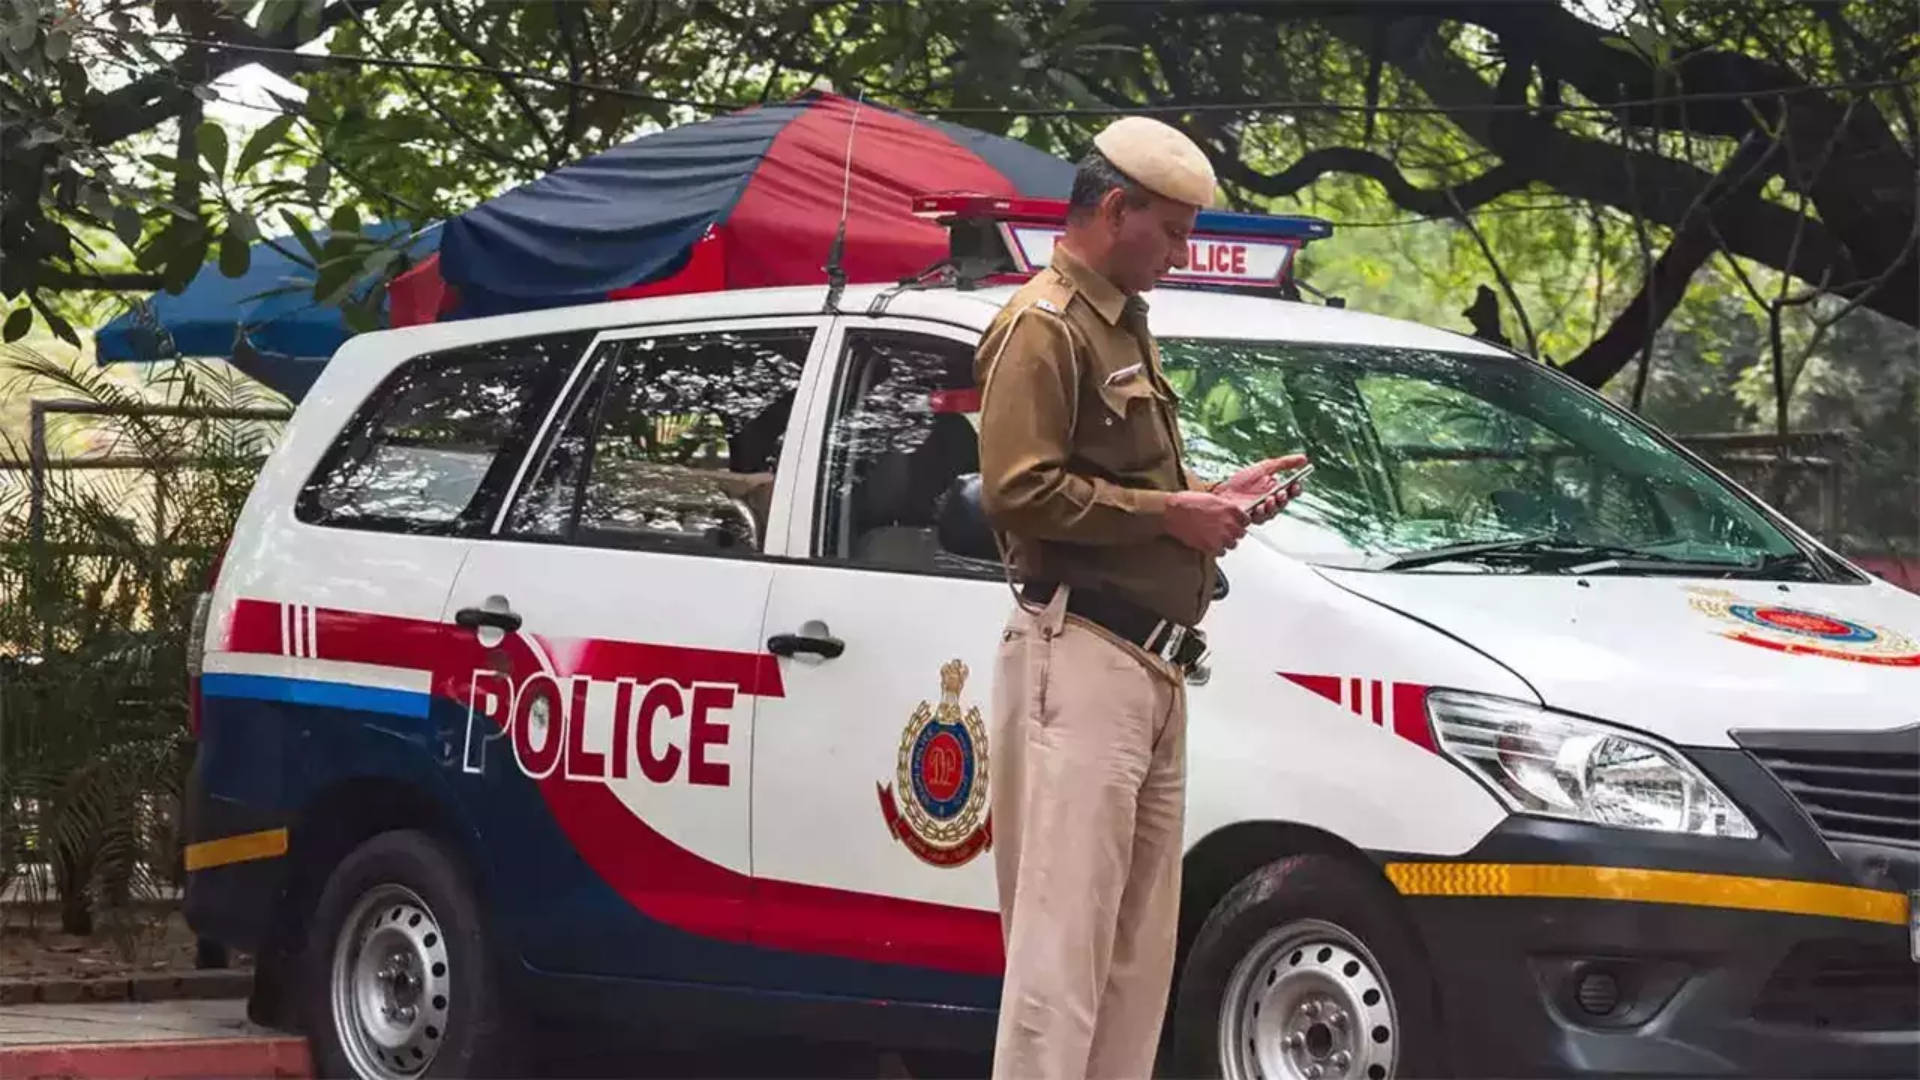 Delhi Police arrests two robbers with help of AI technology